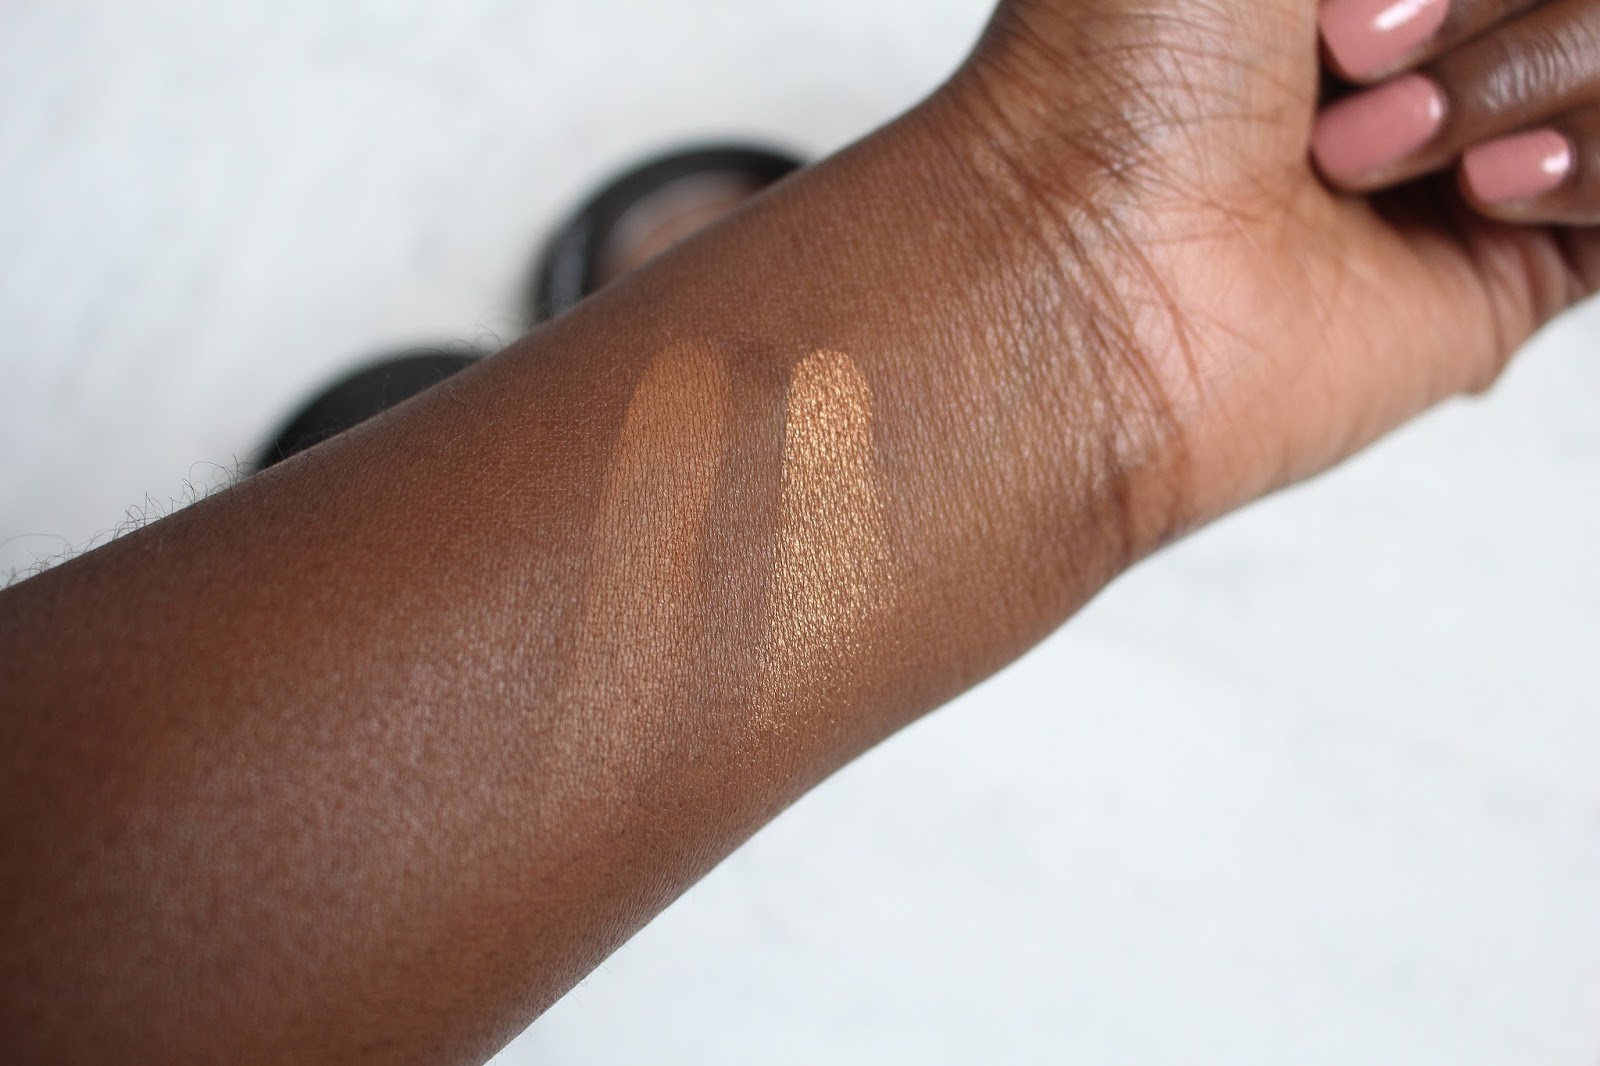 MAC Mineralize Skinfinish Dark Deep (Left) and Gold Deposit (Right)